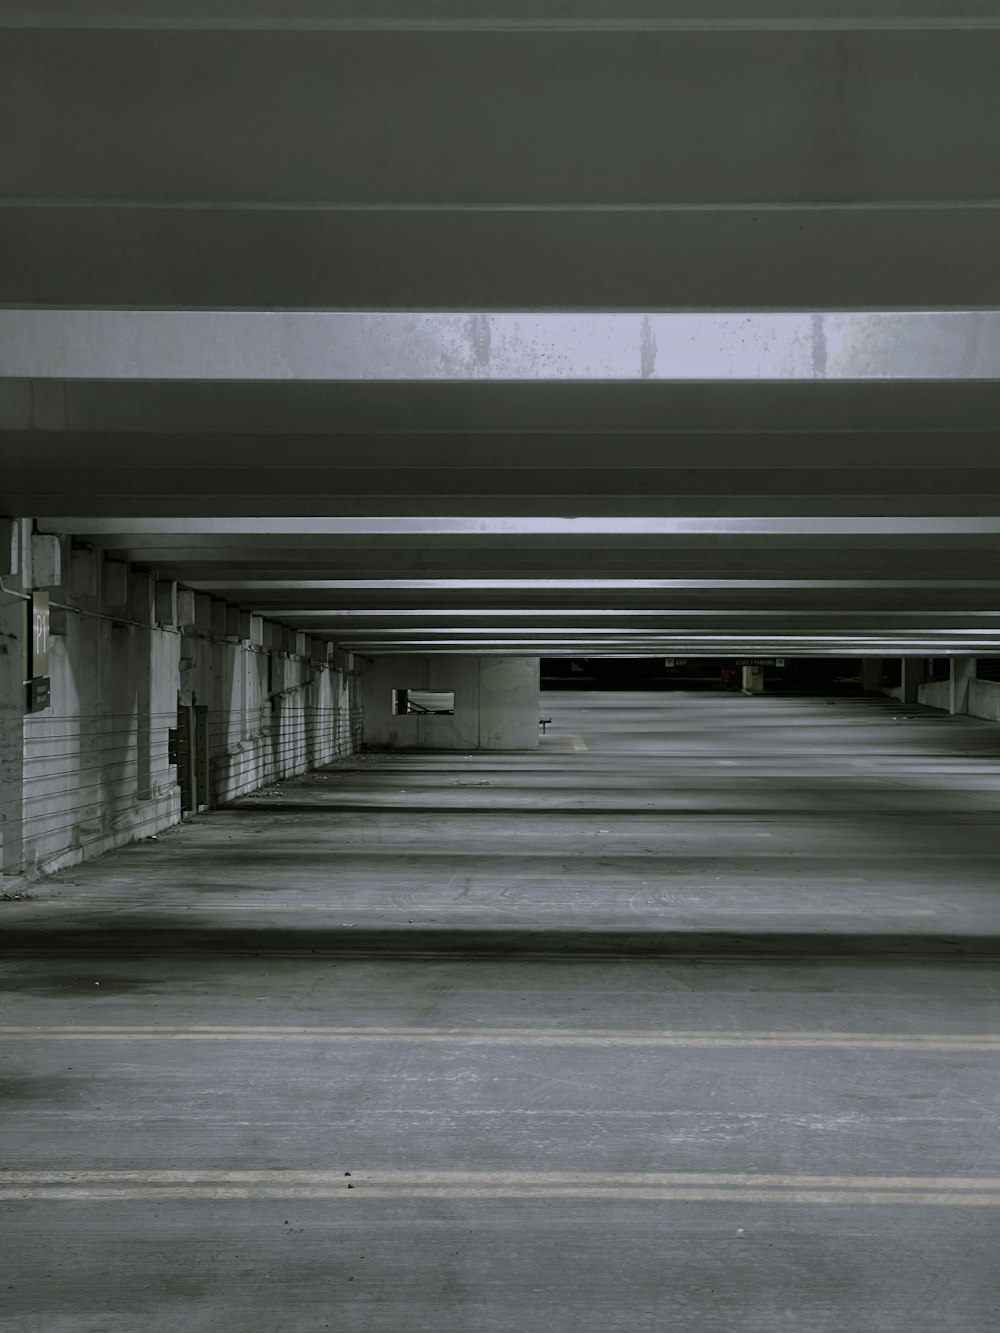 a parking garage filled with lots of empty parking spaces